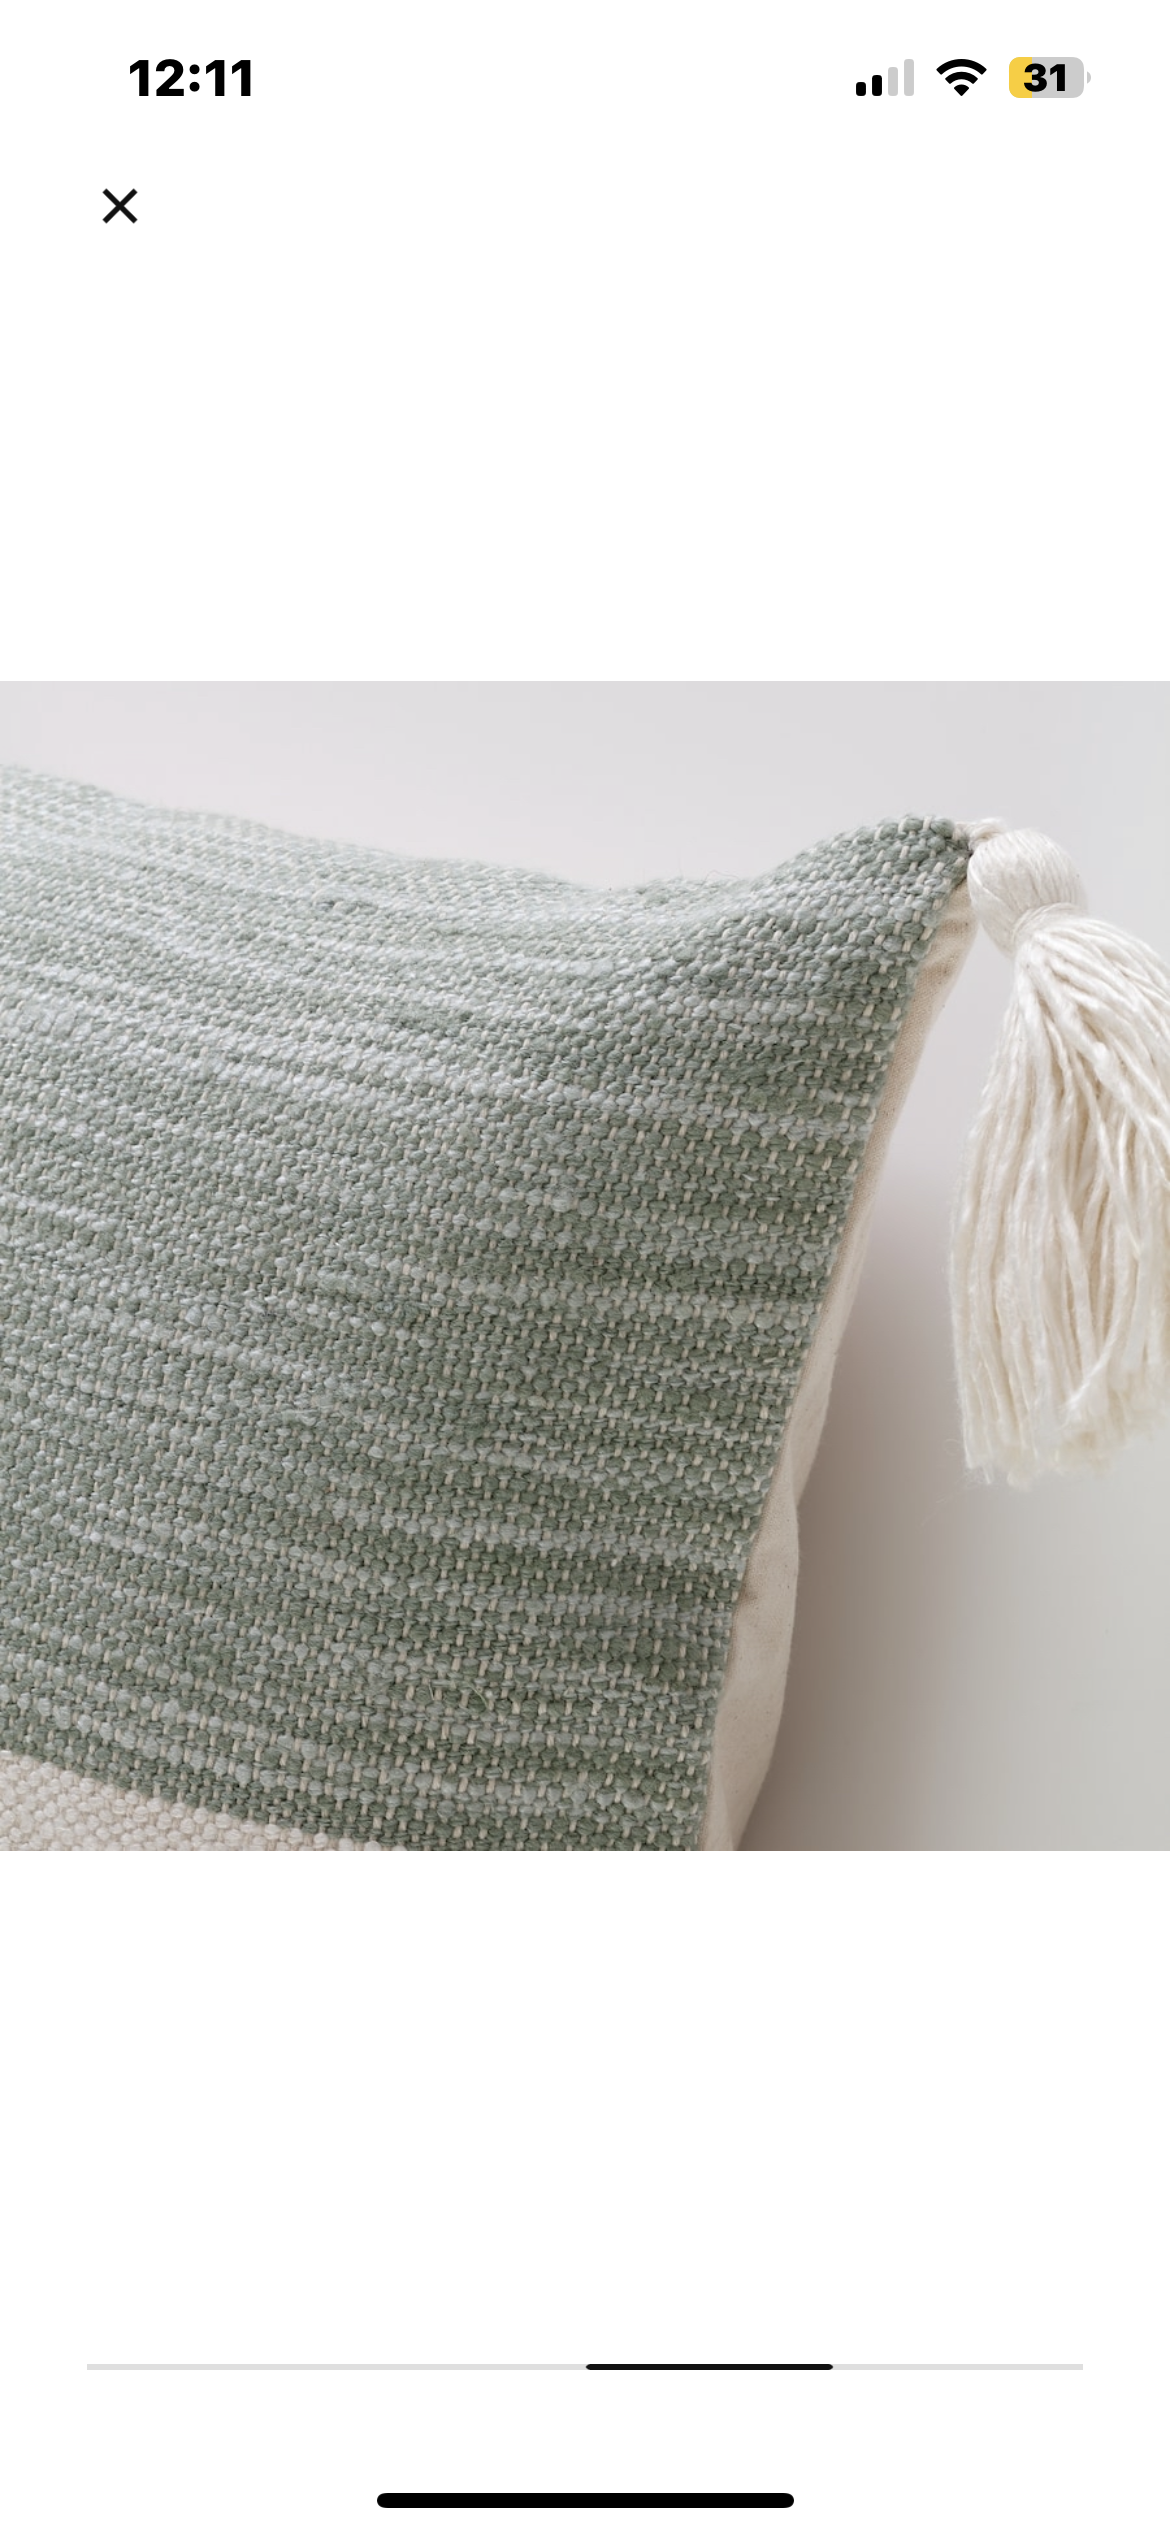 Woven Throw Cushion with Tassels